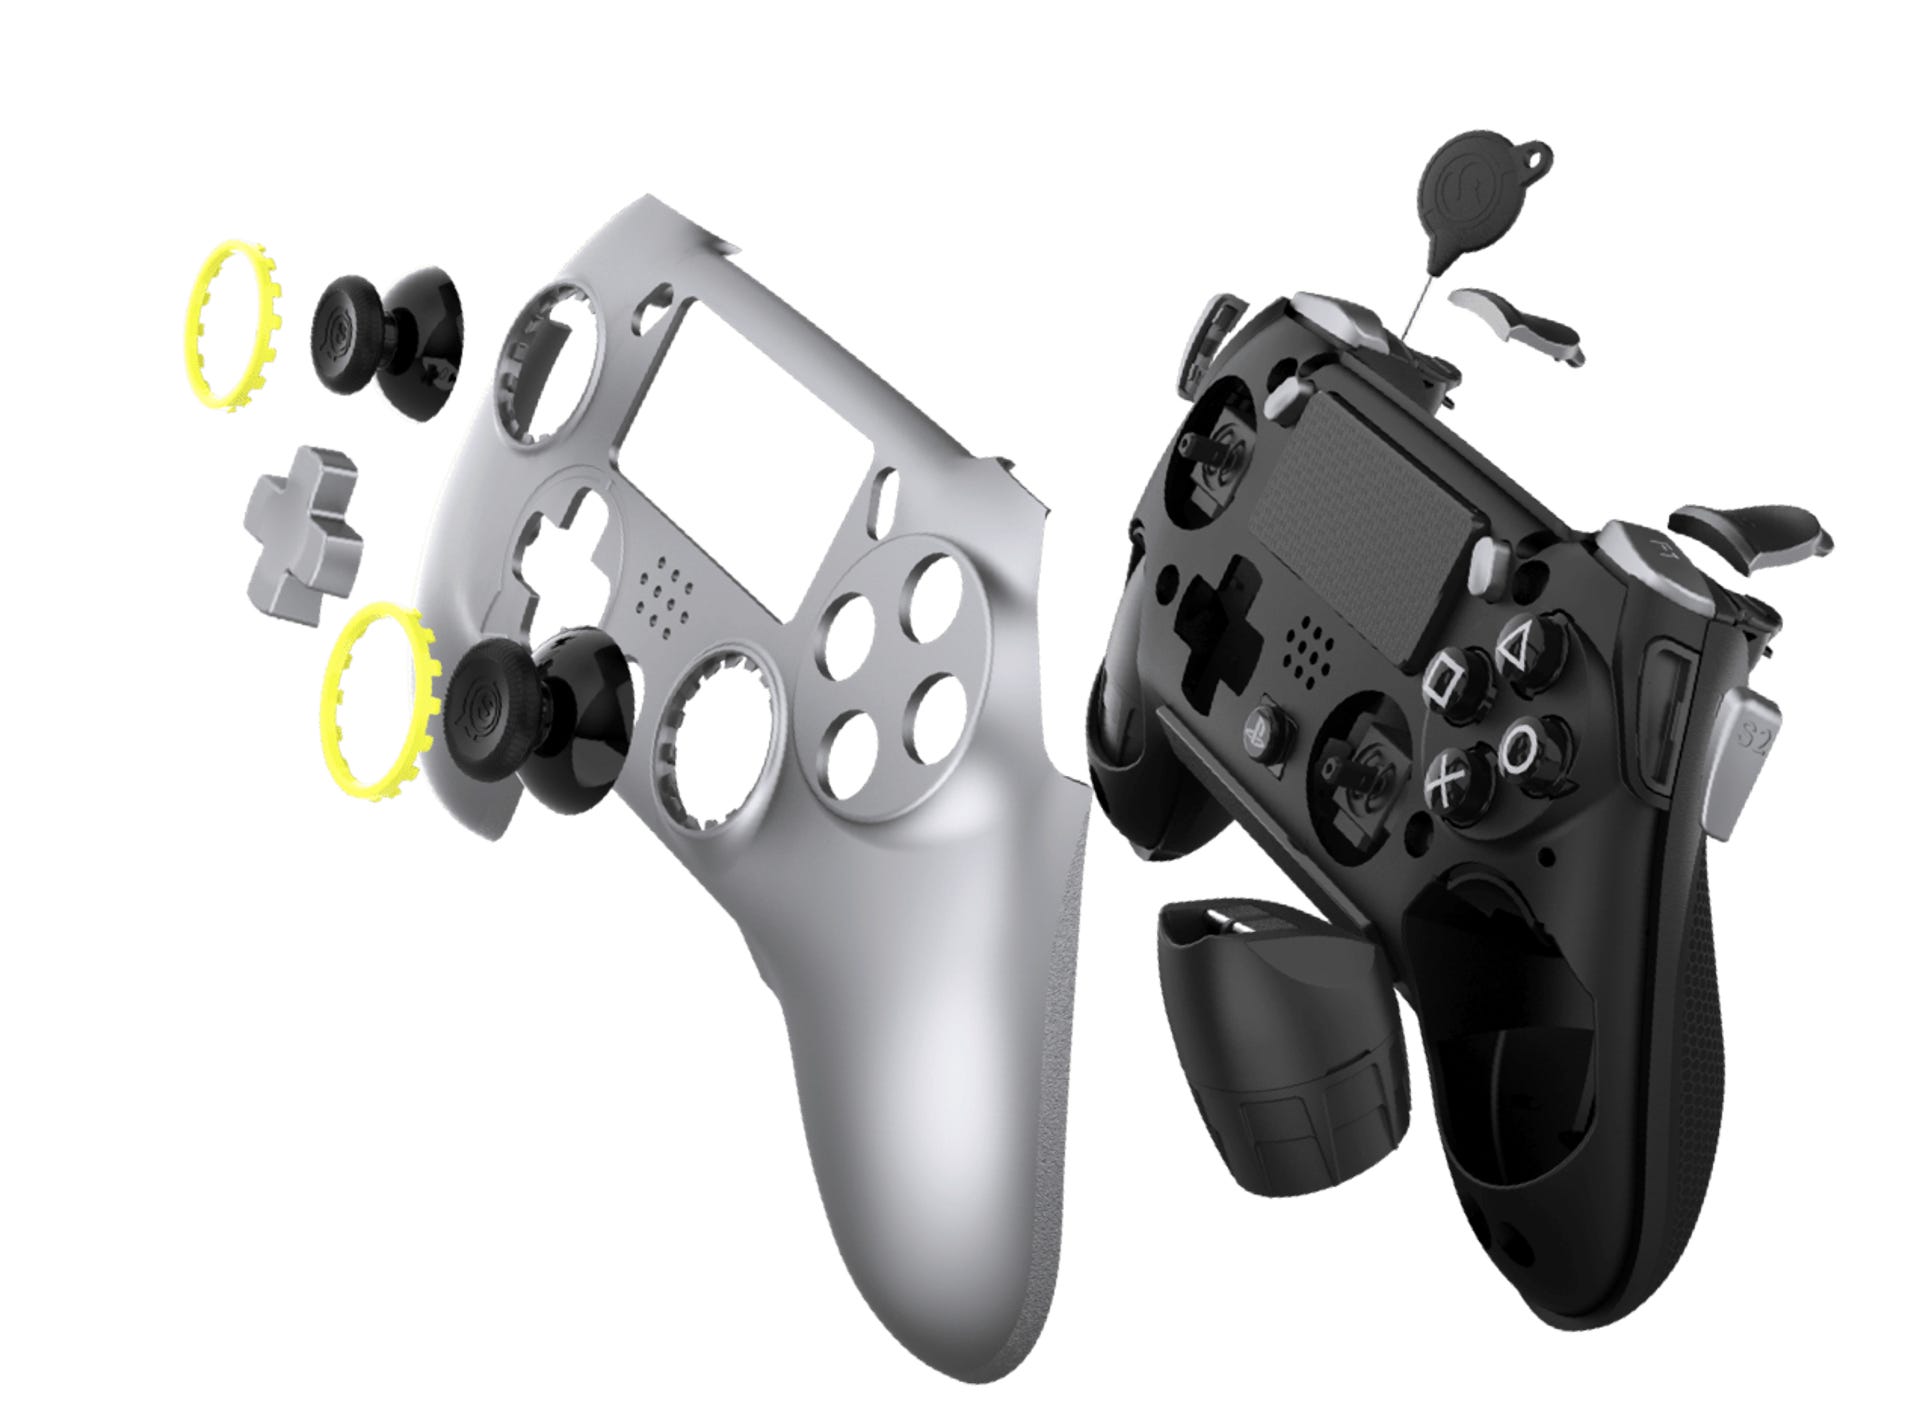 scuf-expanded-ps4